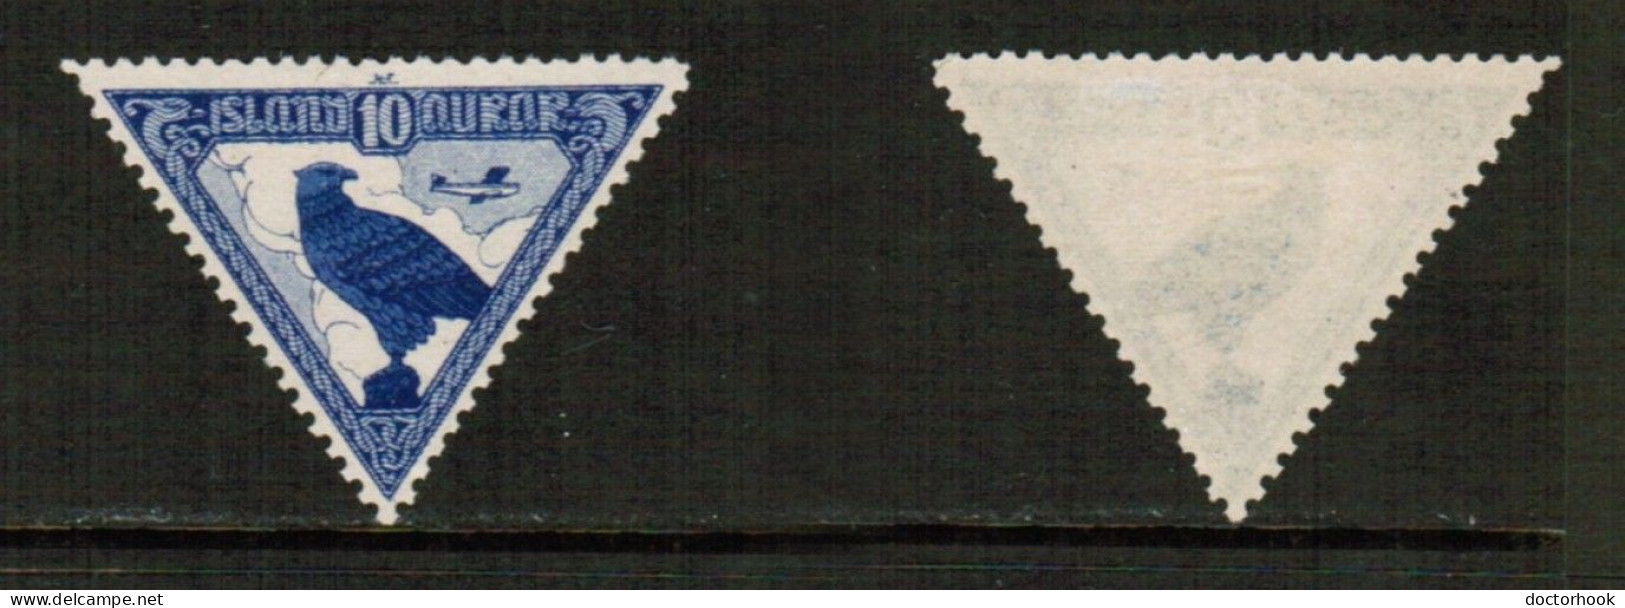 ICELAND   Scott # C 3* MINT HINGED (CONDITION AS PER SCAN) (Stamp Scan # 915-5) - Aéreo